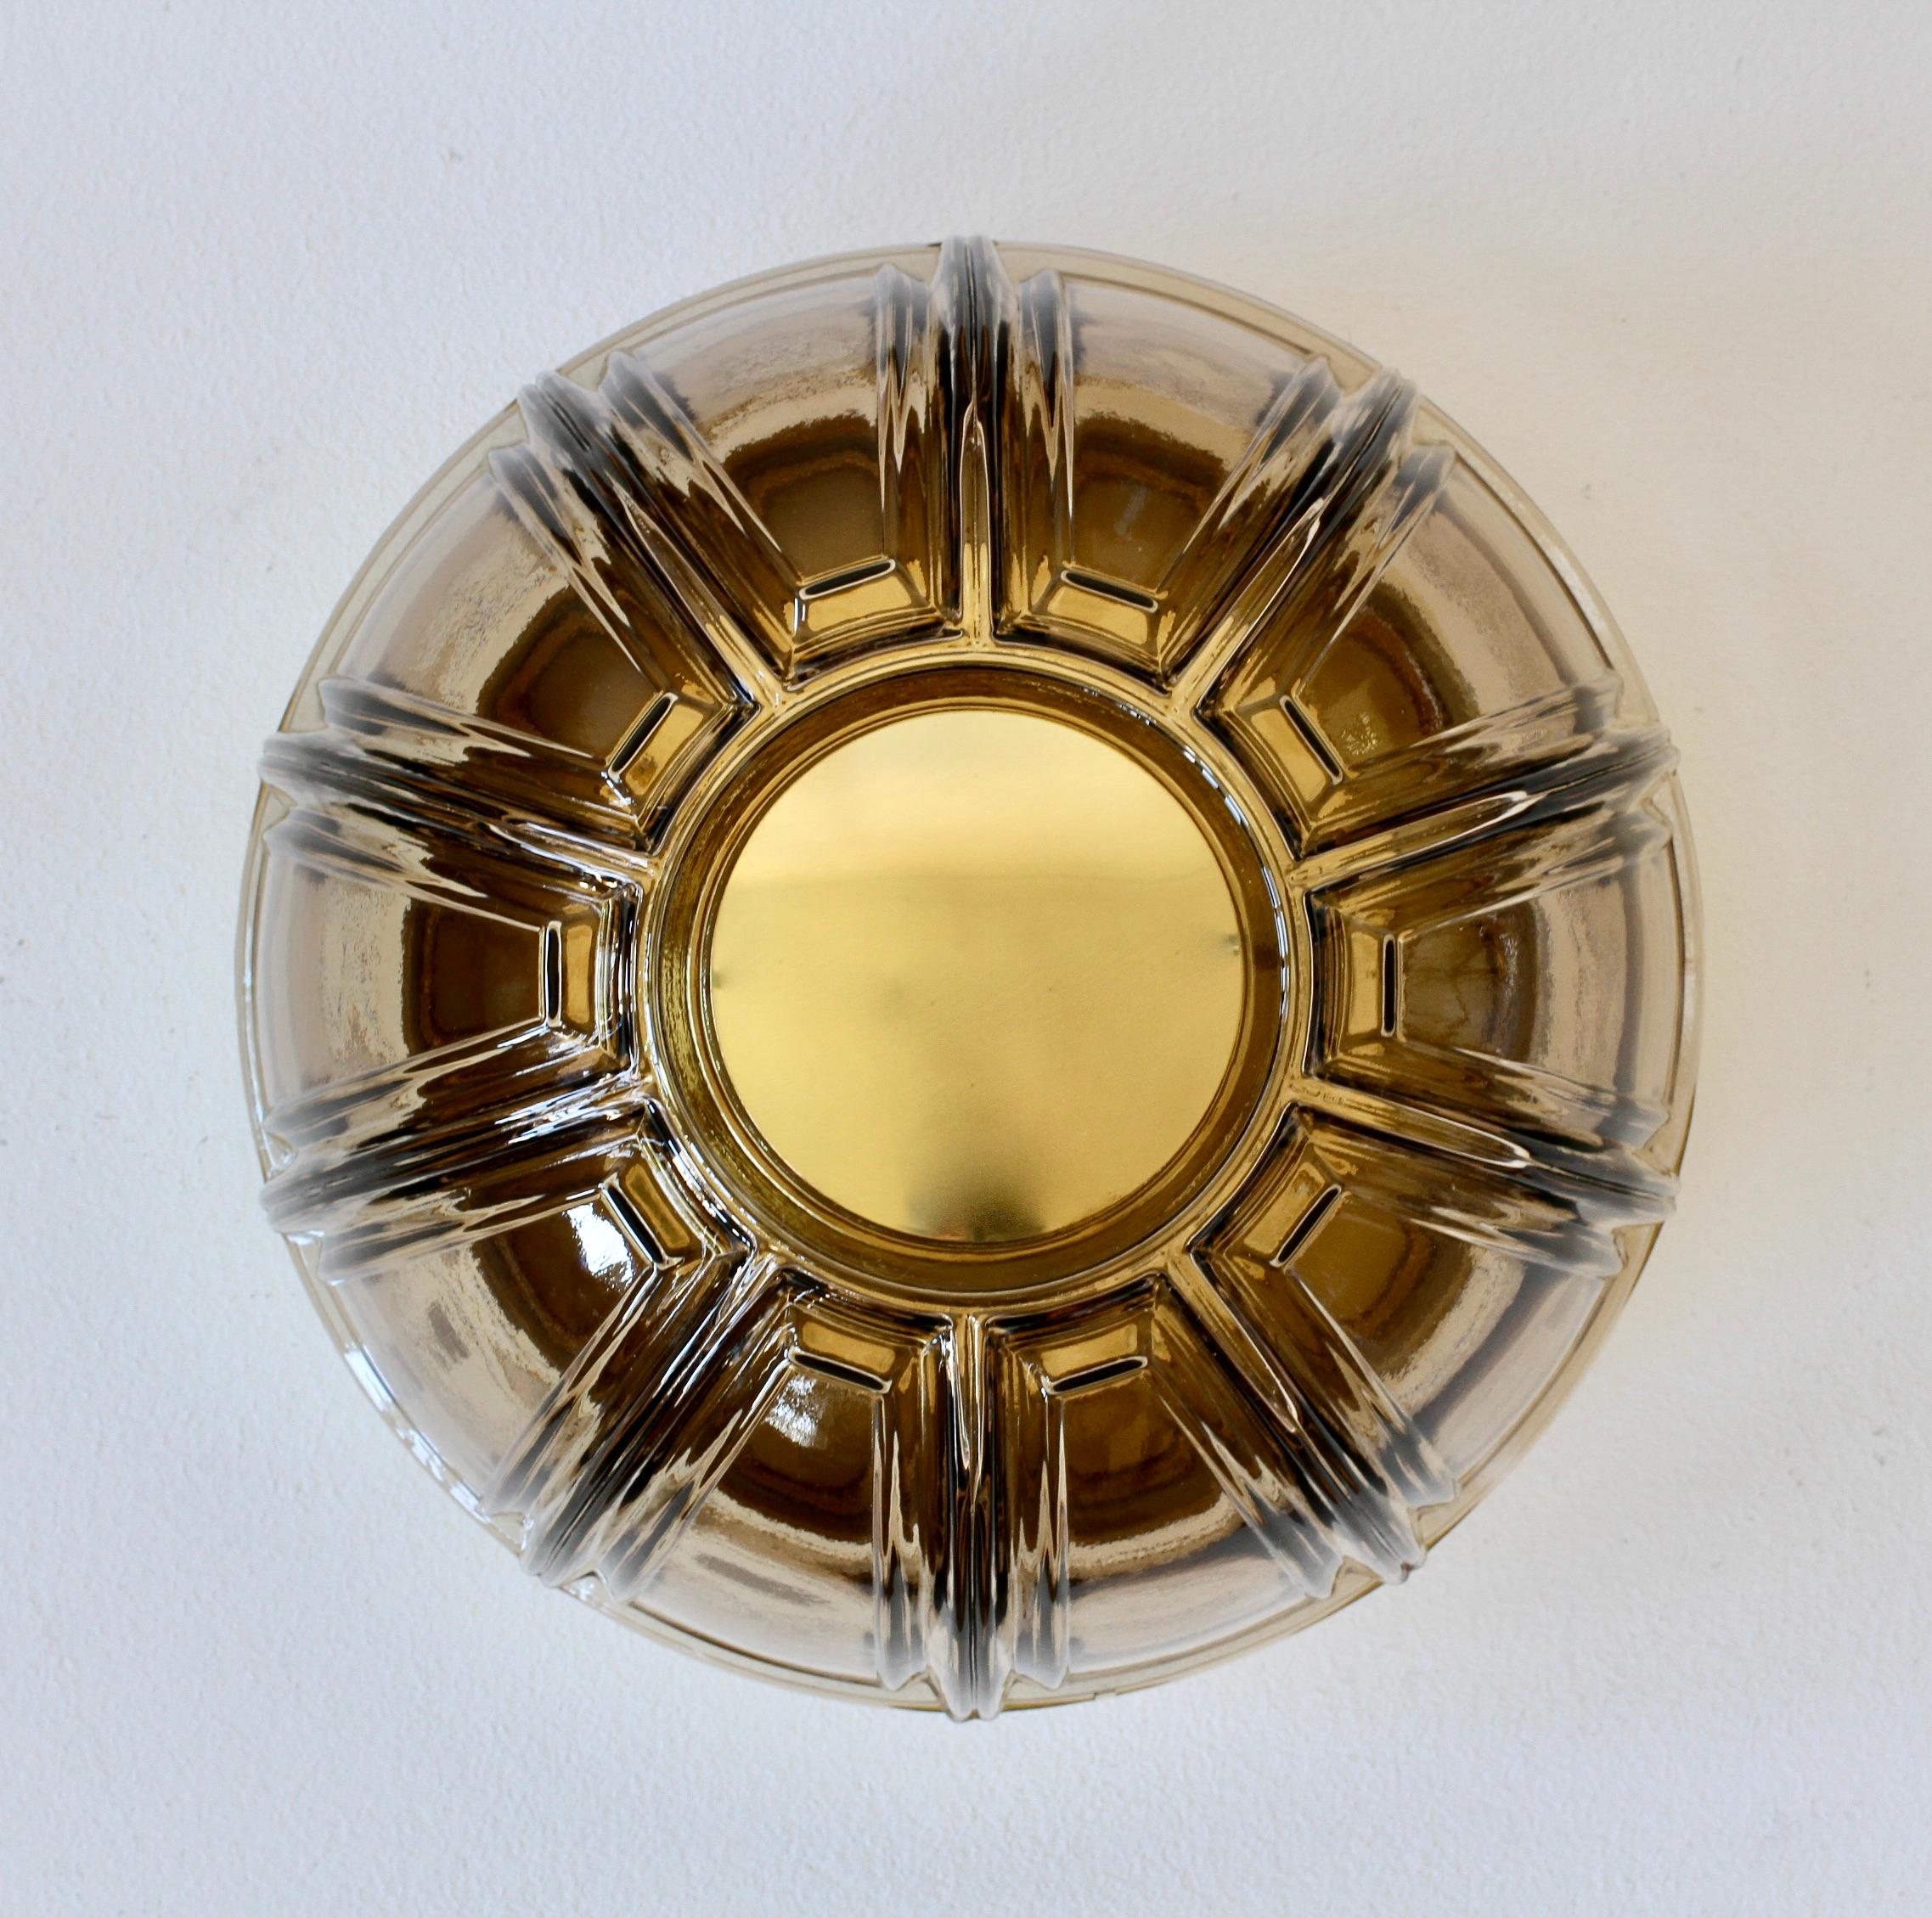 One of a set of five funky vintage midcentury wall lights or sconces by German lighting manufacturer Glashütte Limburg, circa 1975-1985. Featuring geometric shaped mouth blown topaz dark 